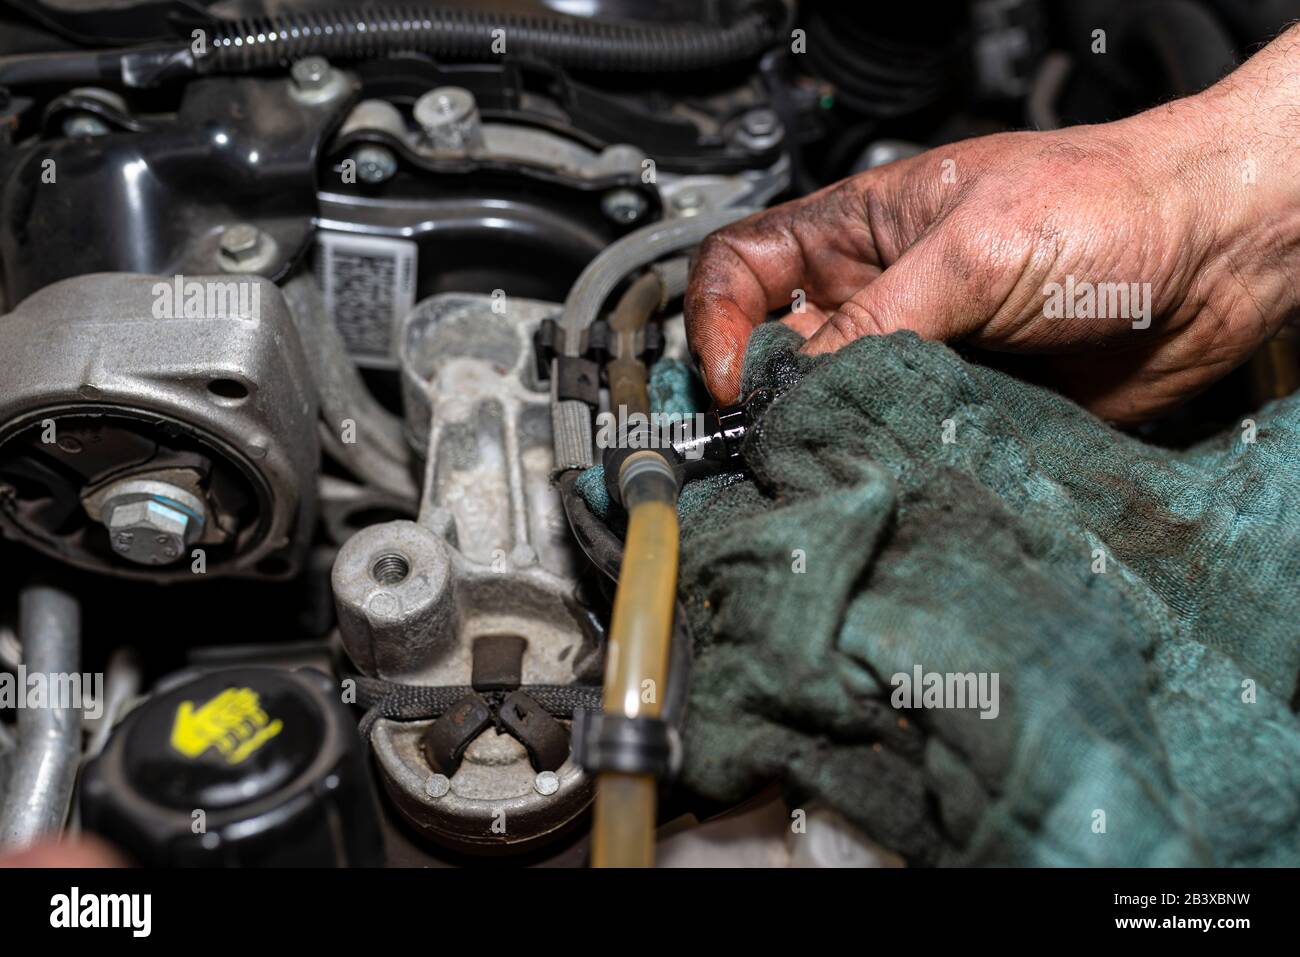 The mechanic bleeds the fuel system with a pump that is on the fuel line, after installing a new fuel filter, the man hands are visible. Stock Photo